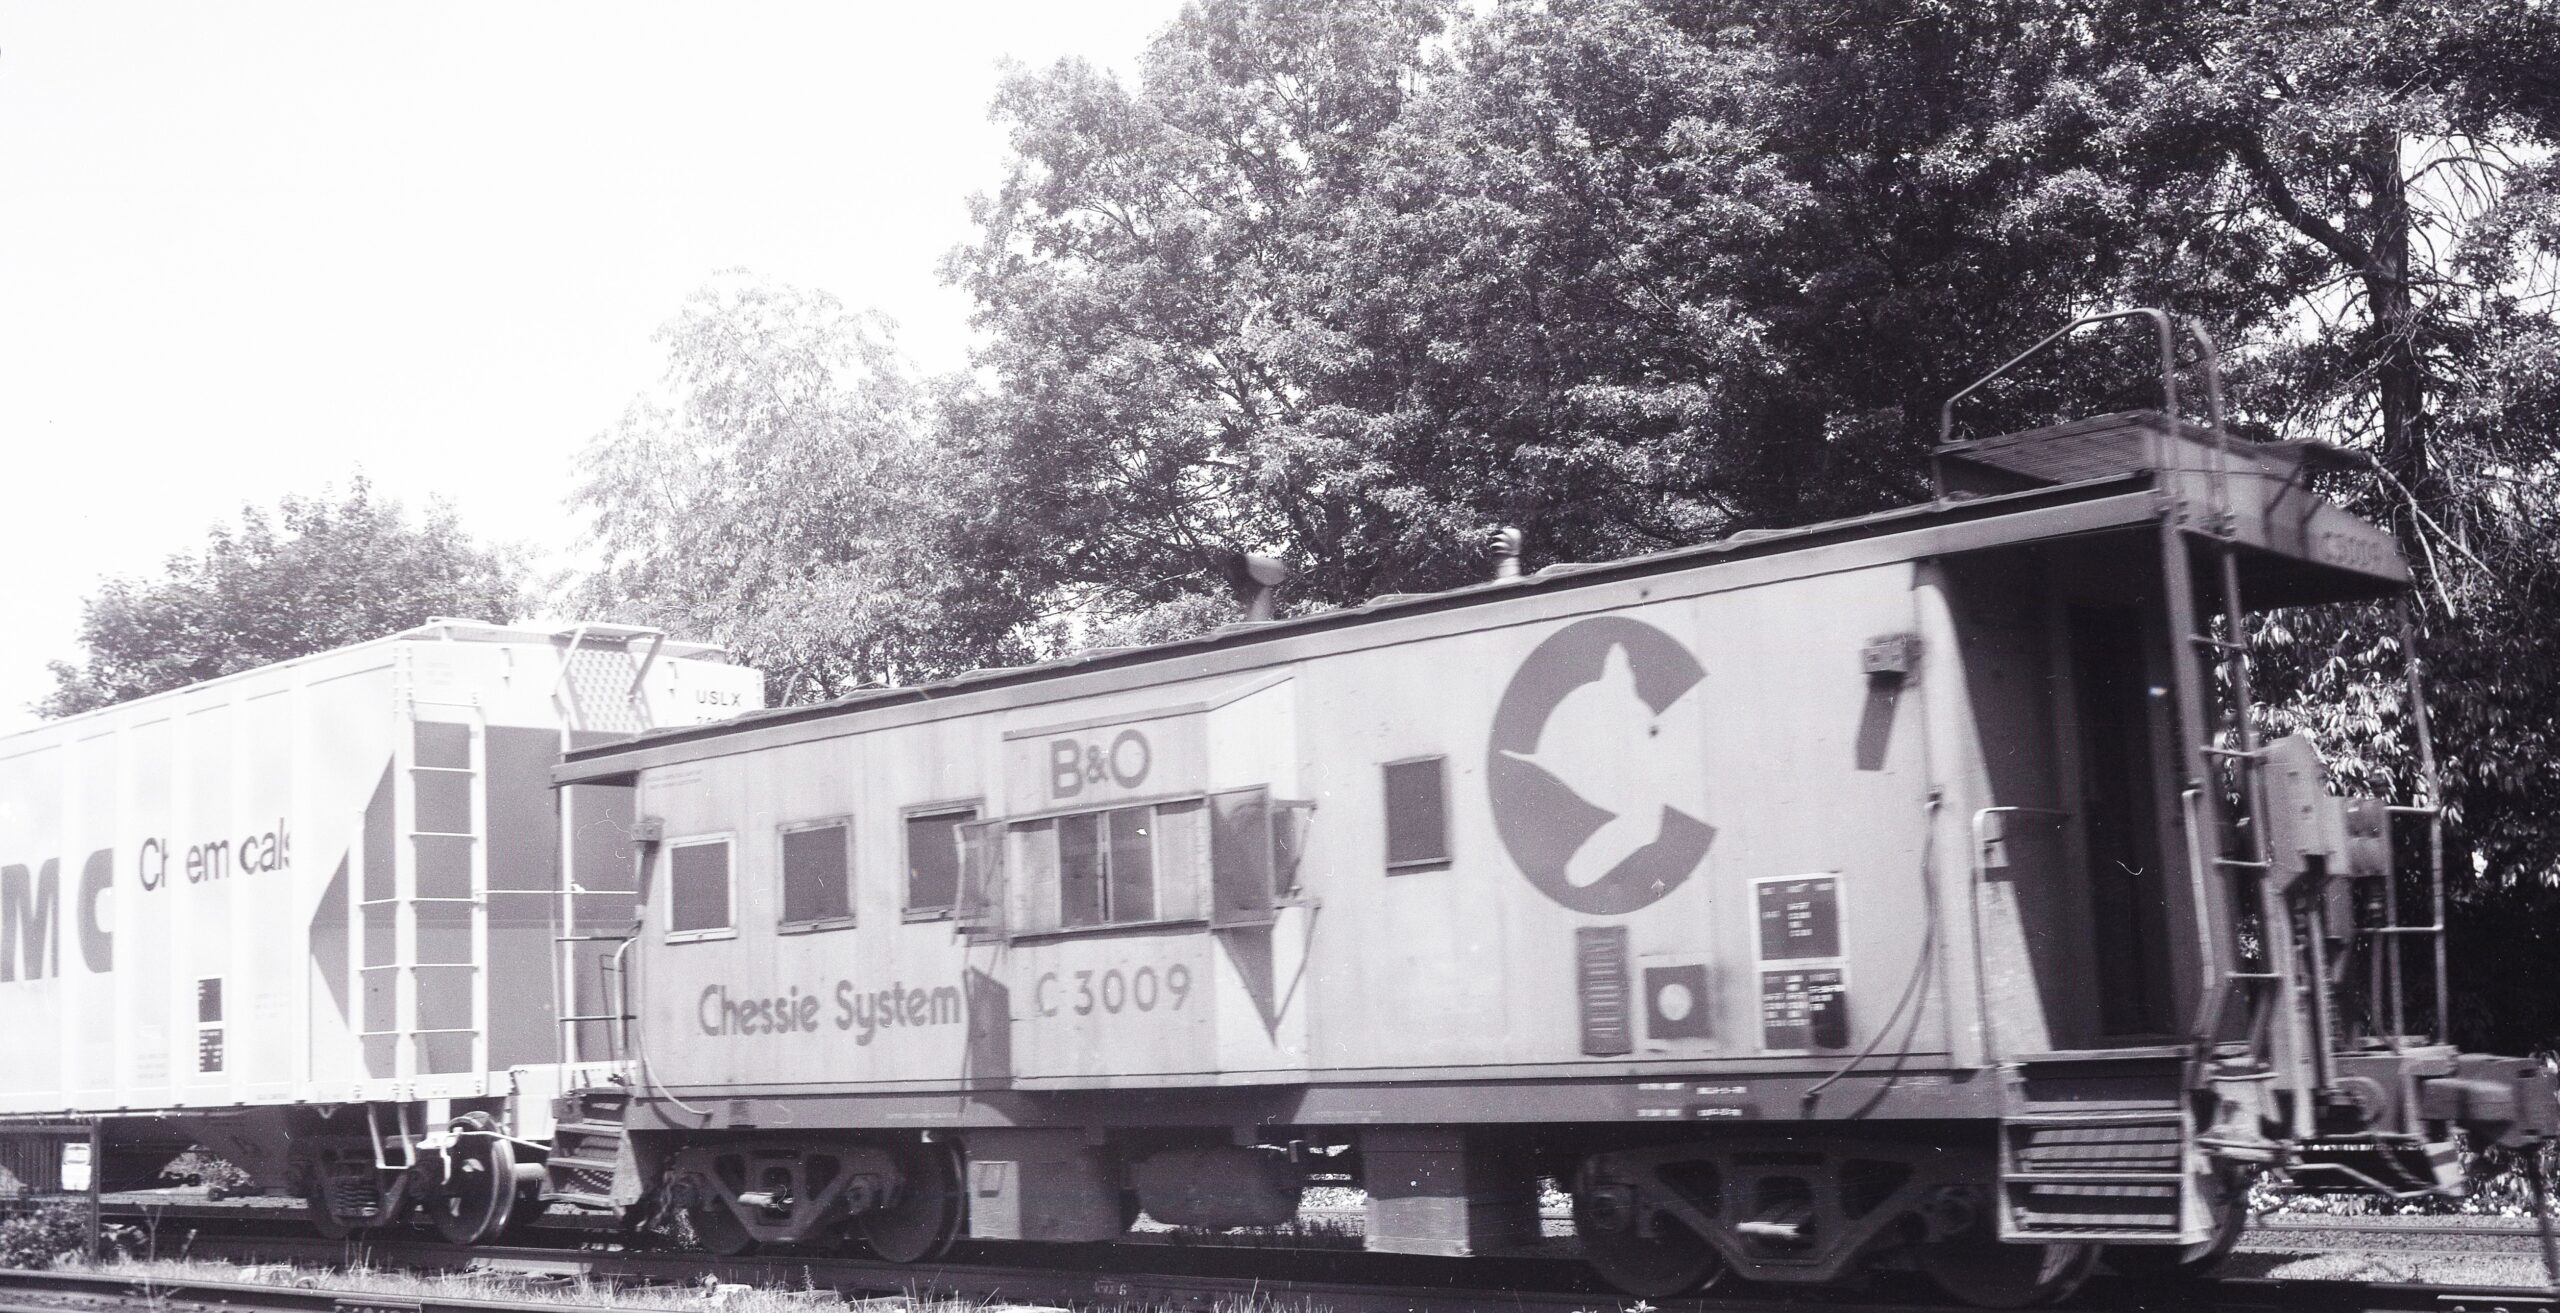 Baltimore and Ohio | Chessie System | Roselle, New Jersey | Class I-18 Caboose C-3009 | June 23,1978 | H.B. Olsen photograph